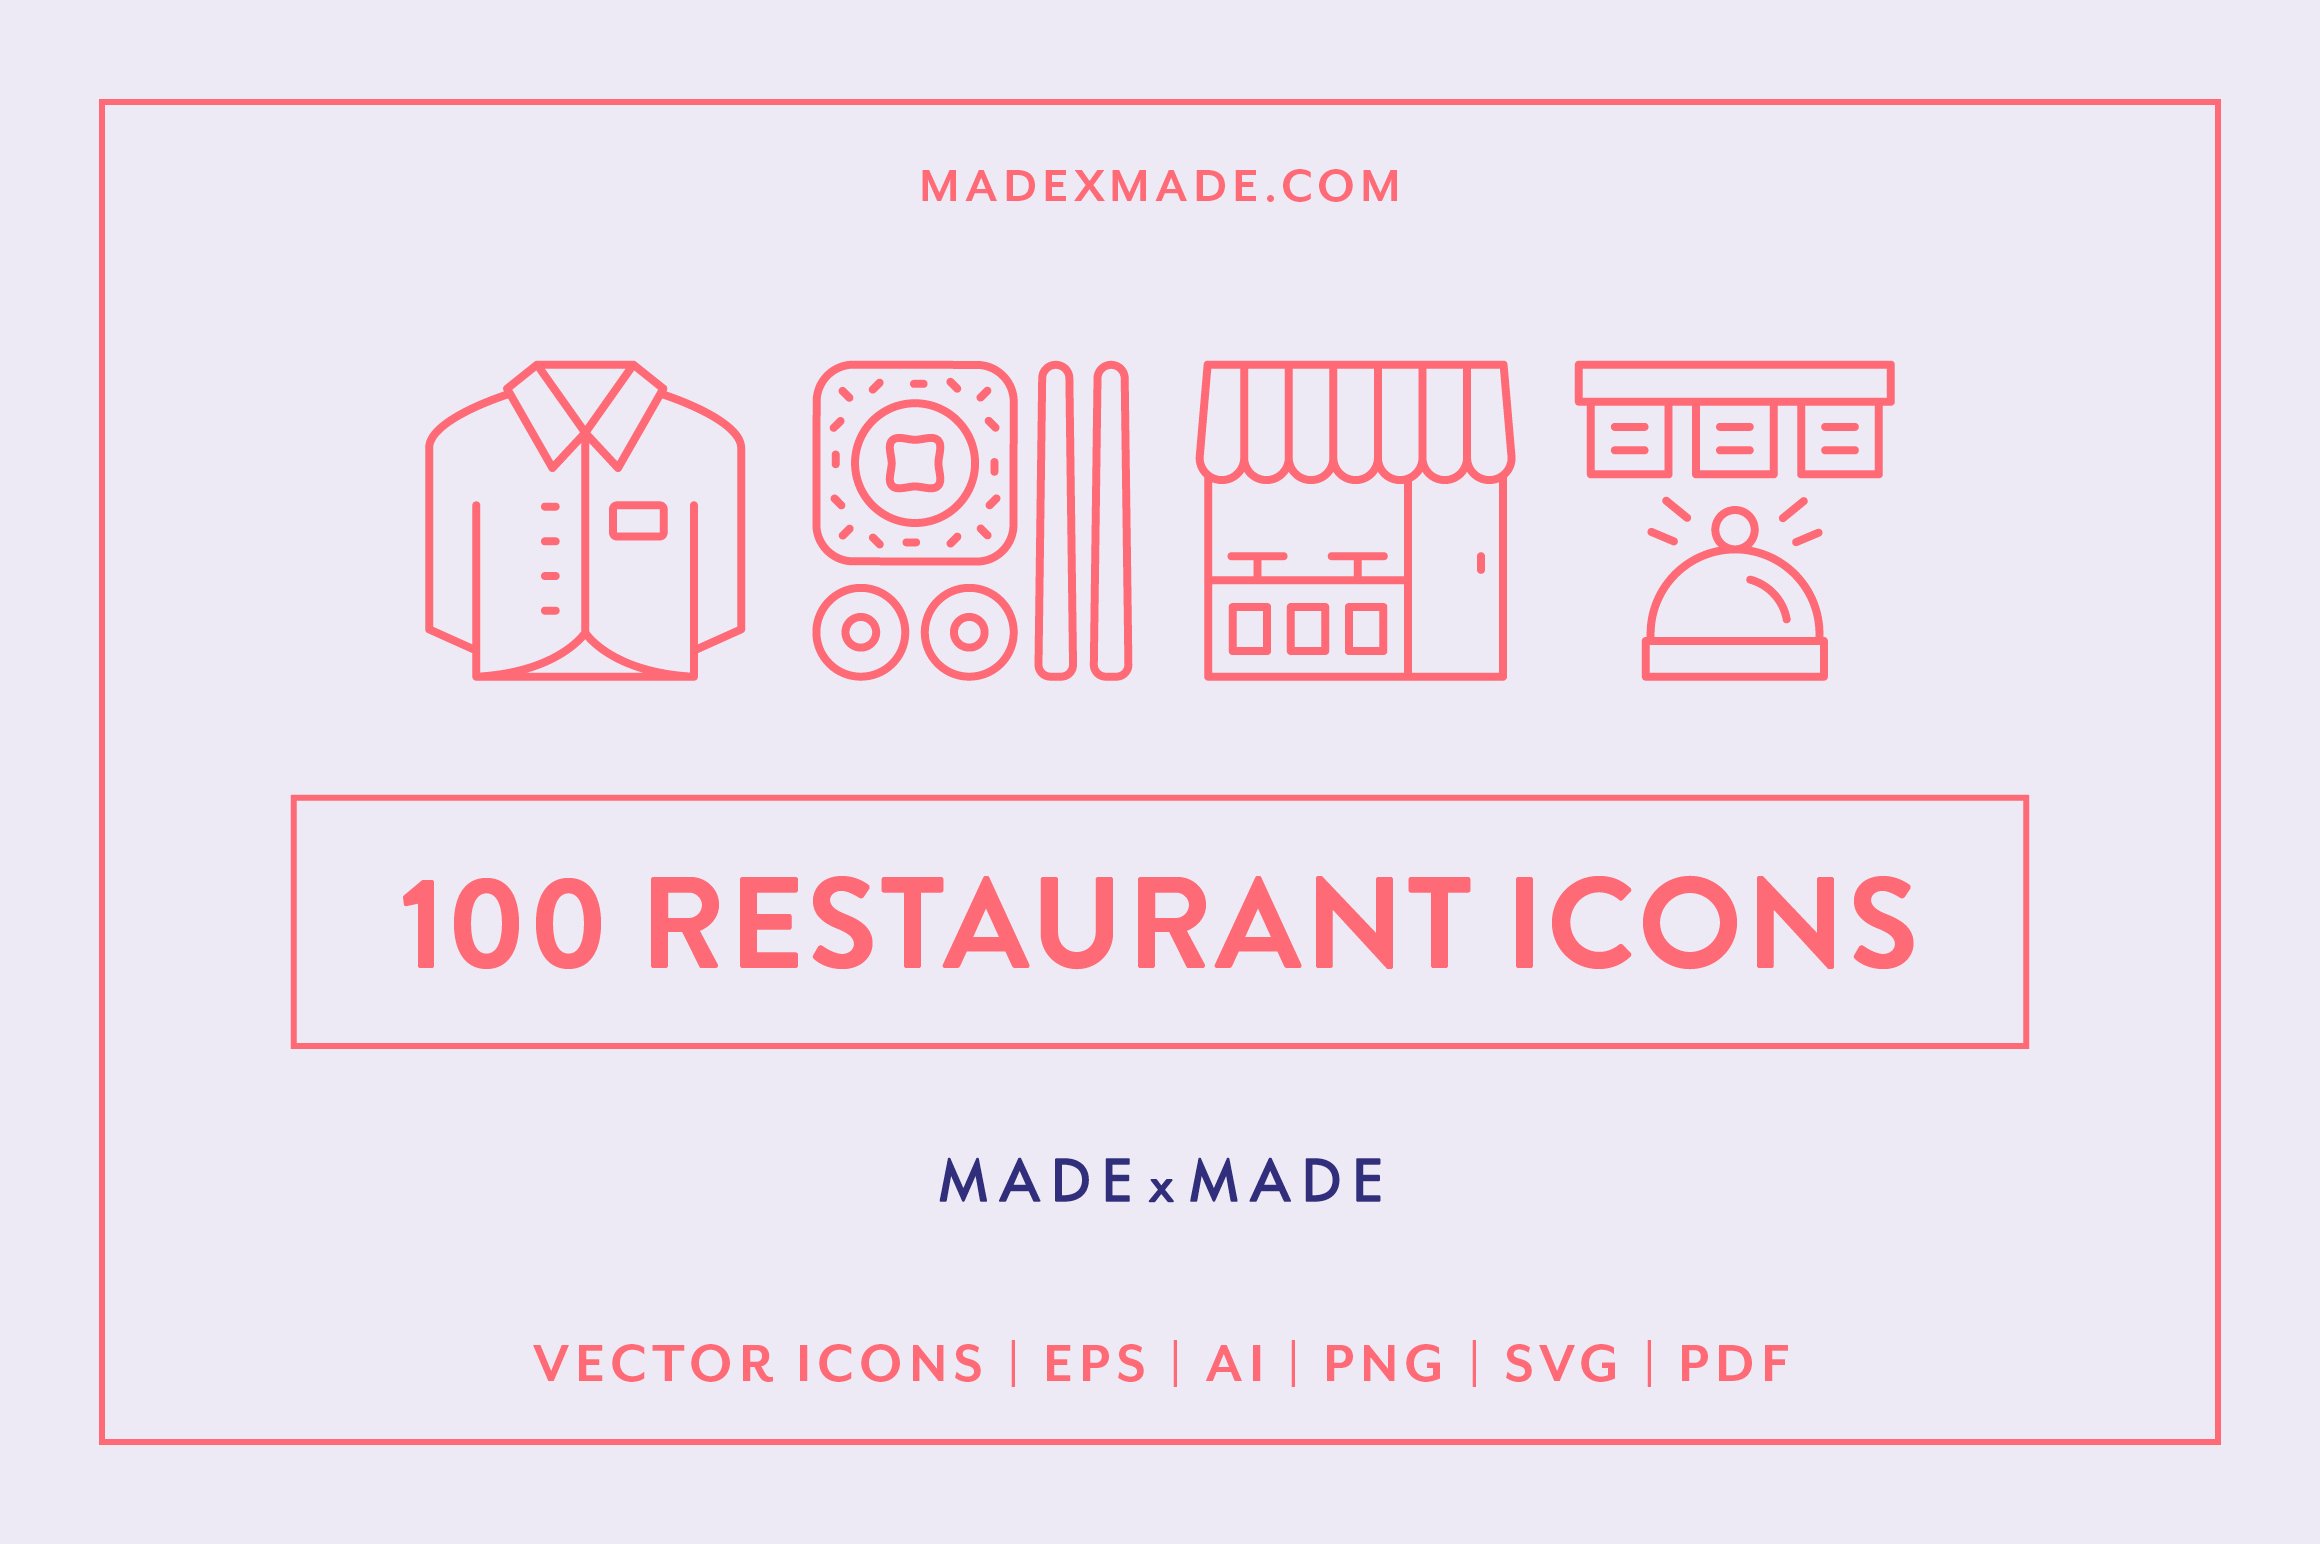 Restaurant Line Icons cover image.